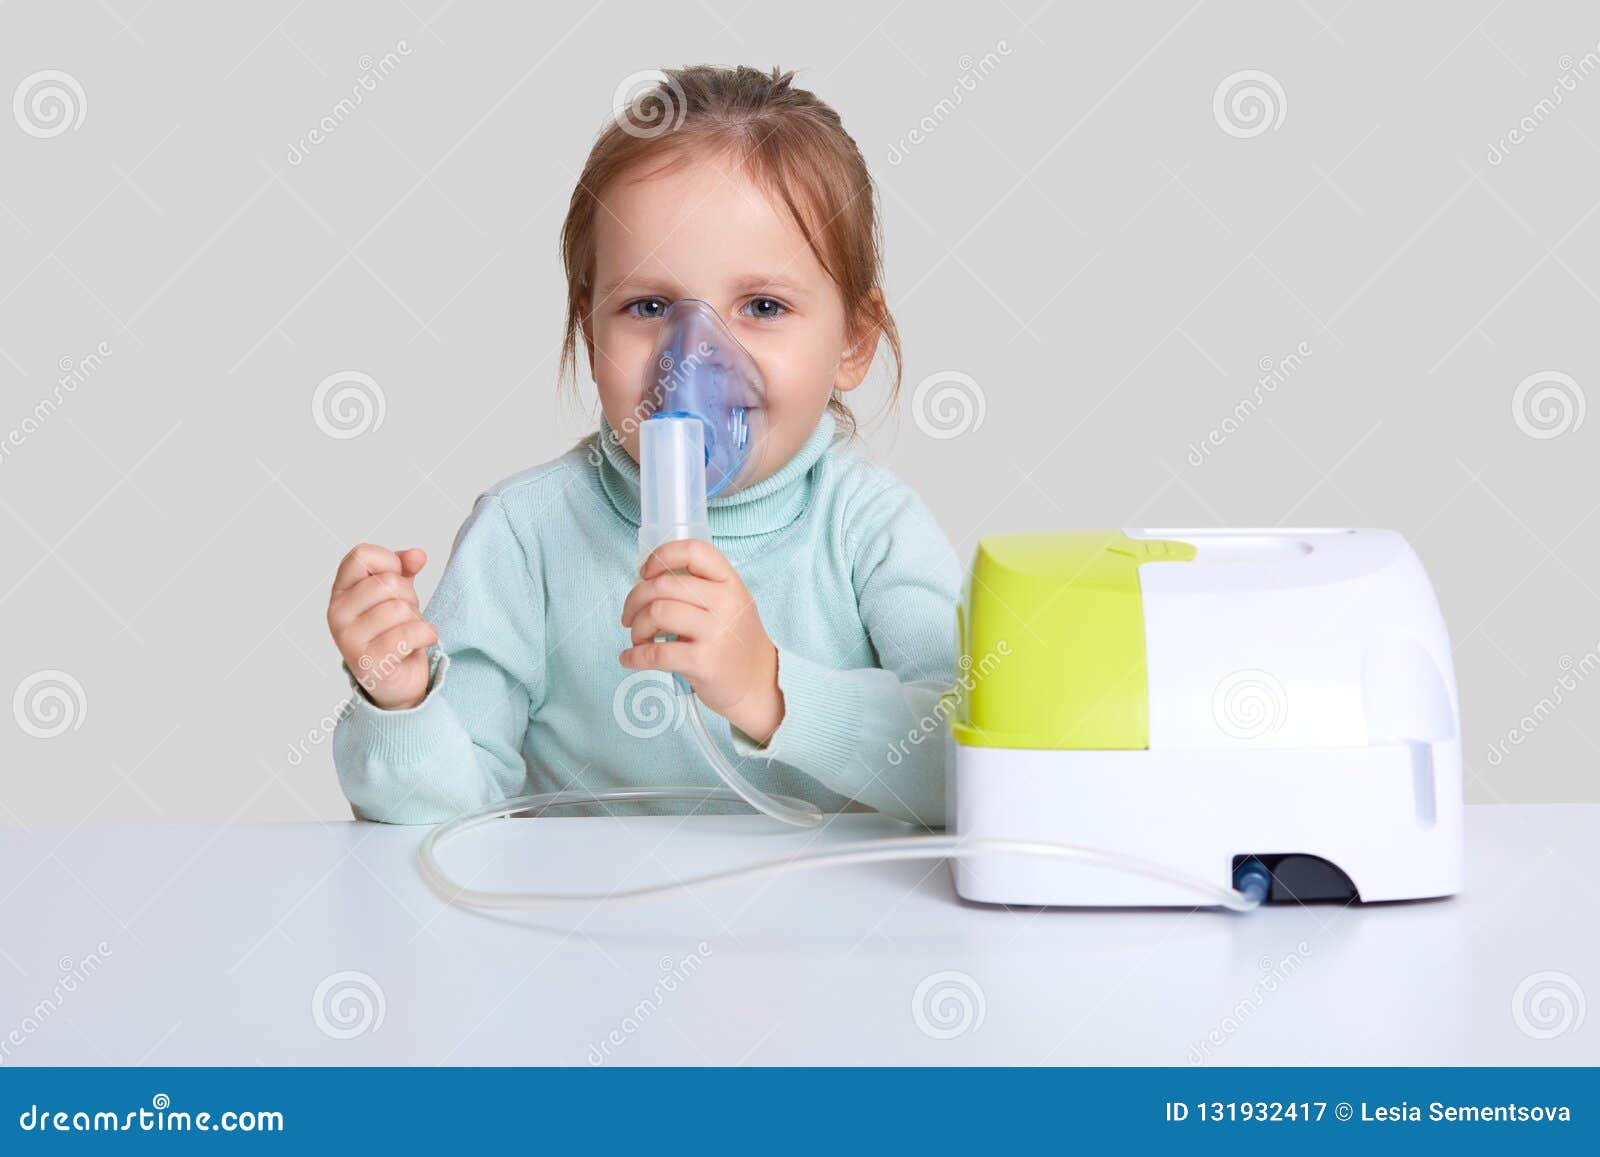 how to give nebulizer to child